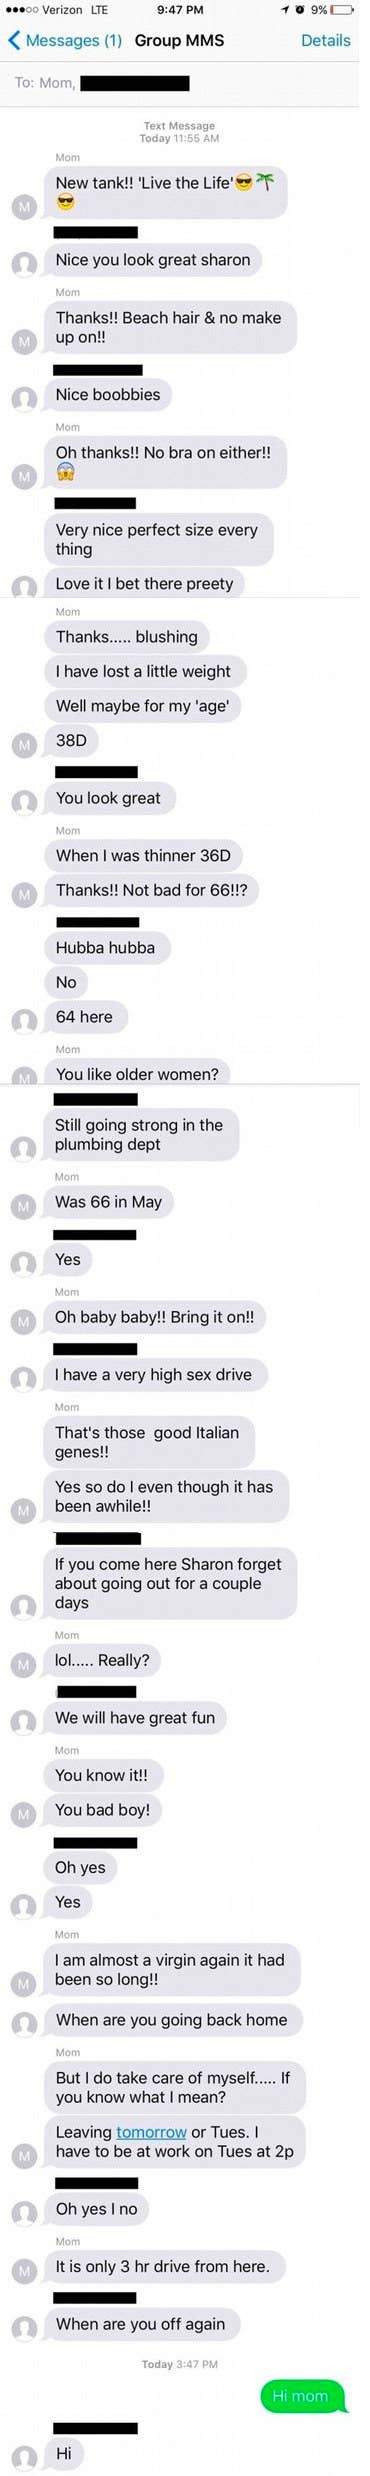 Someone&#x27;s mom talks about sex drive with someone else not knowing their child is in the group chat